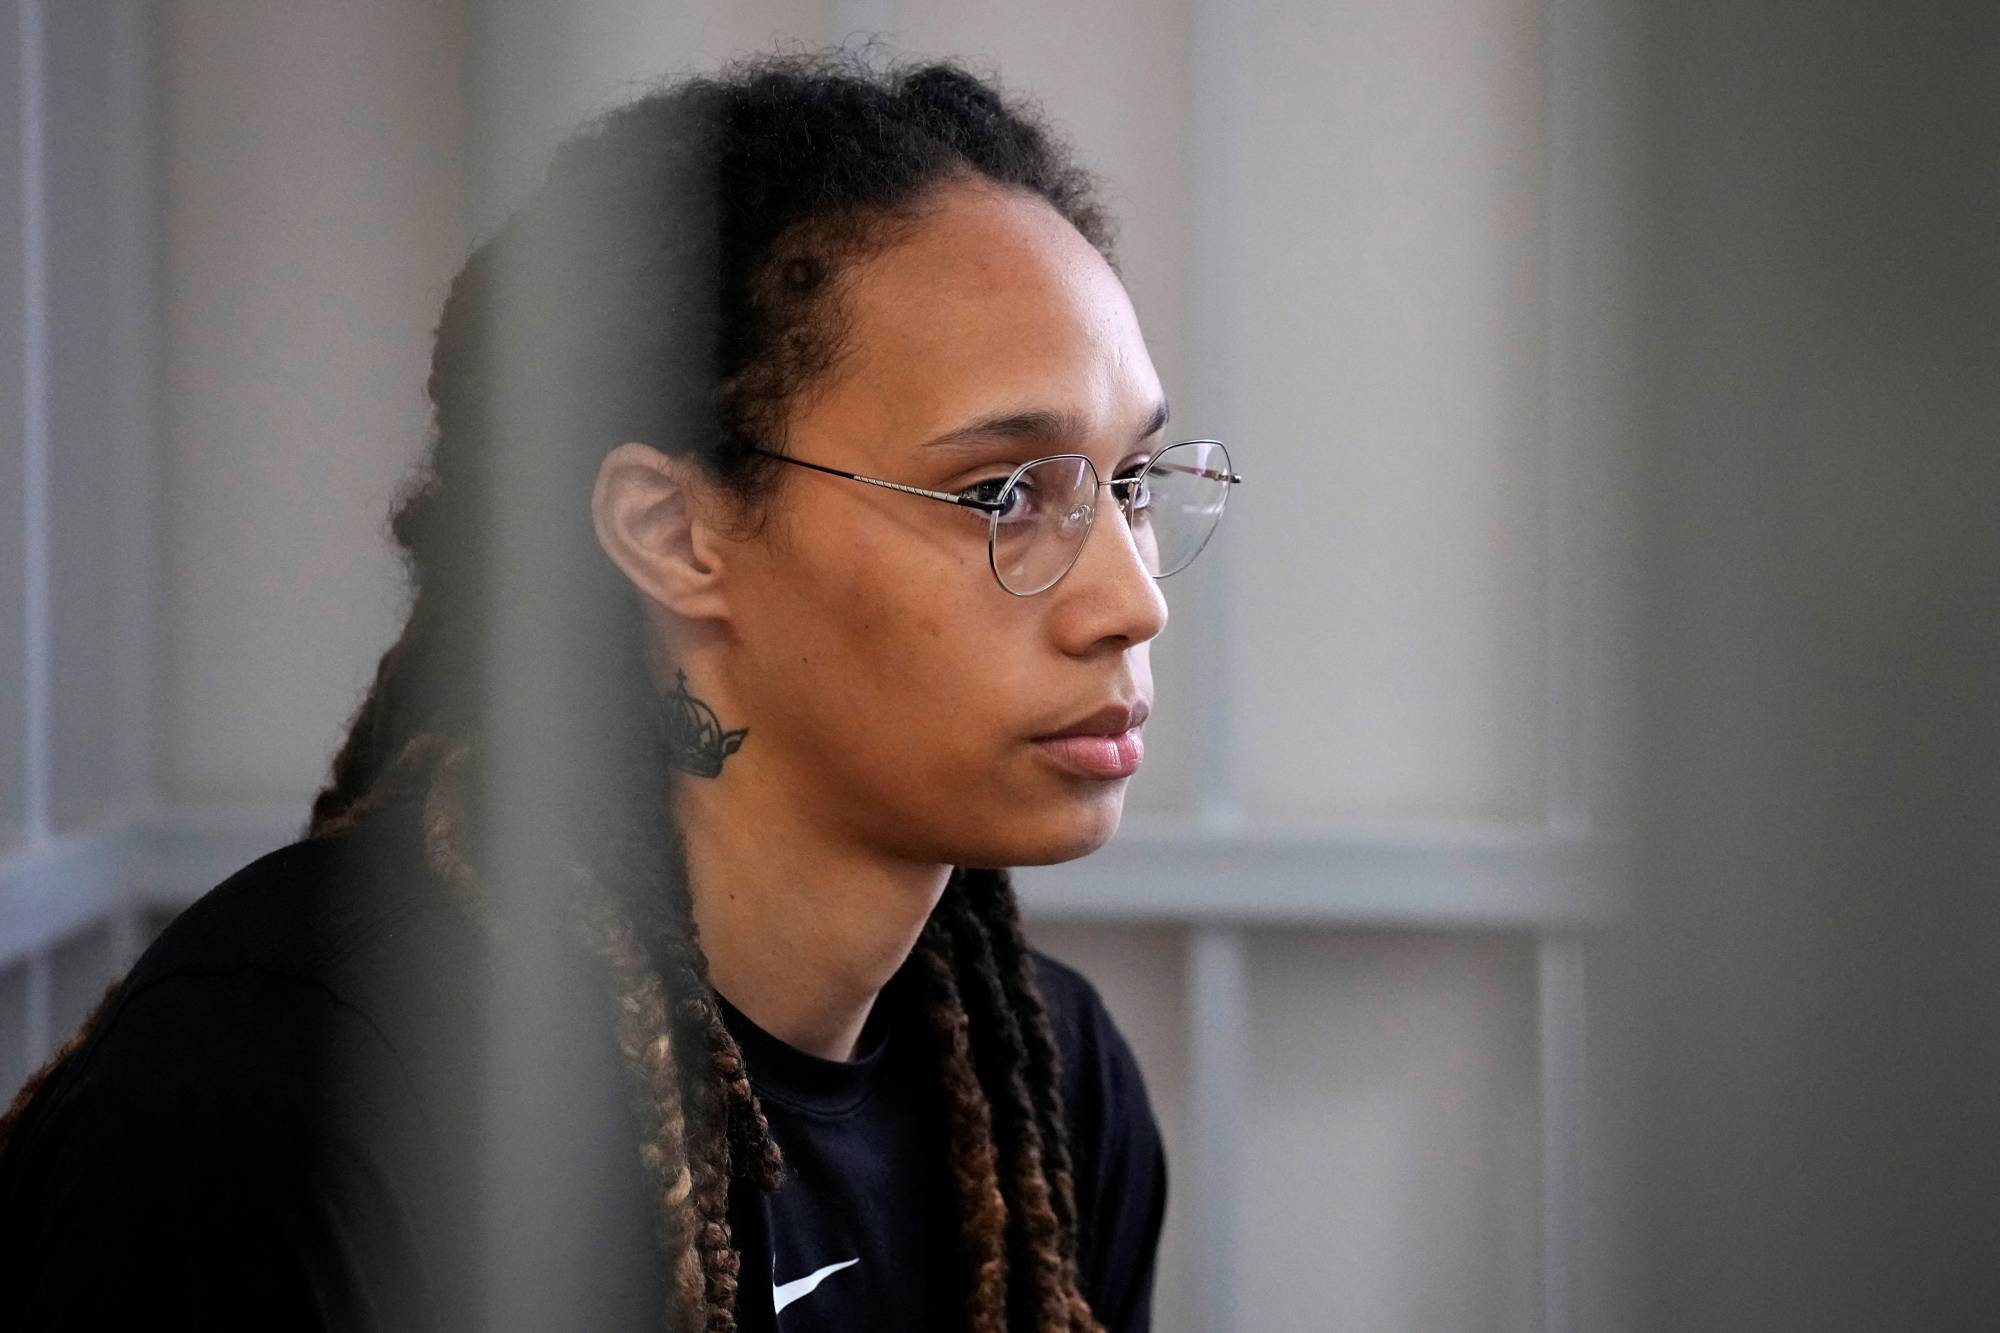 Russian Court Finds Brittney Griner Guilty in Drug Trial